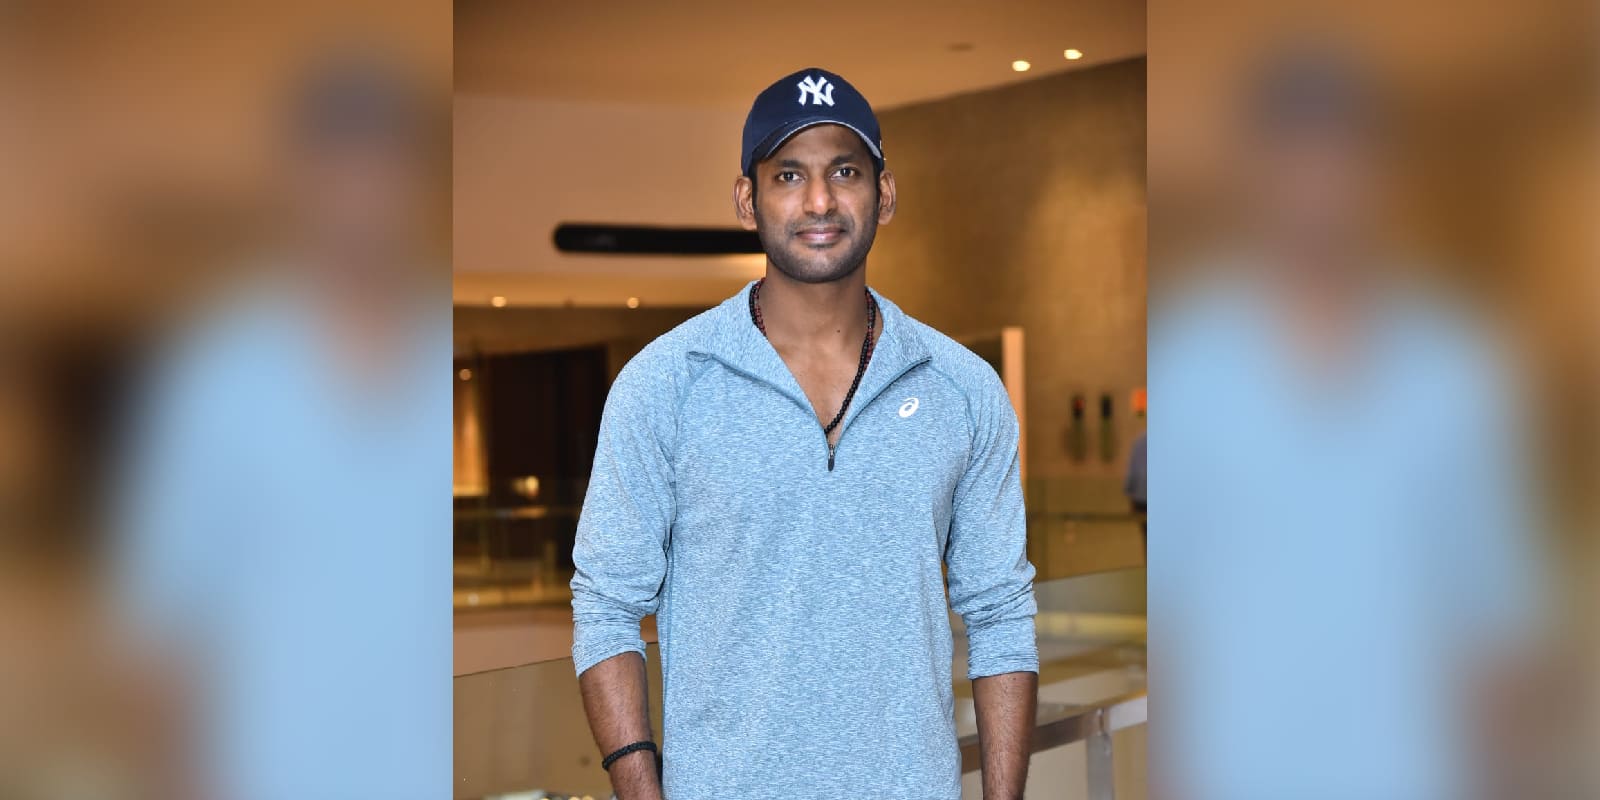 Vishal will next be seen in Rathnam